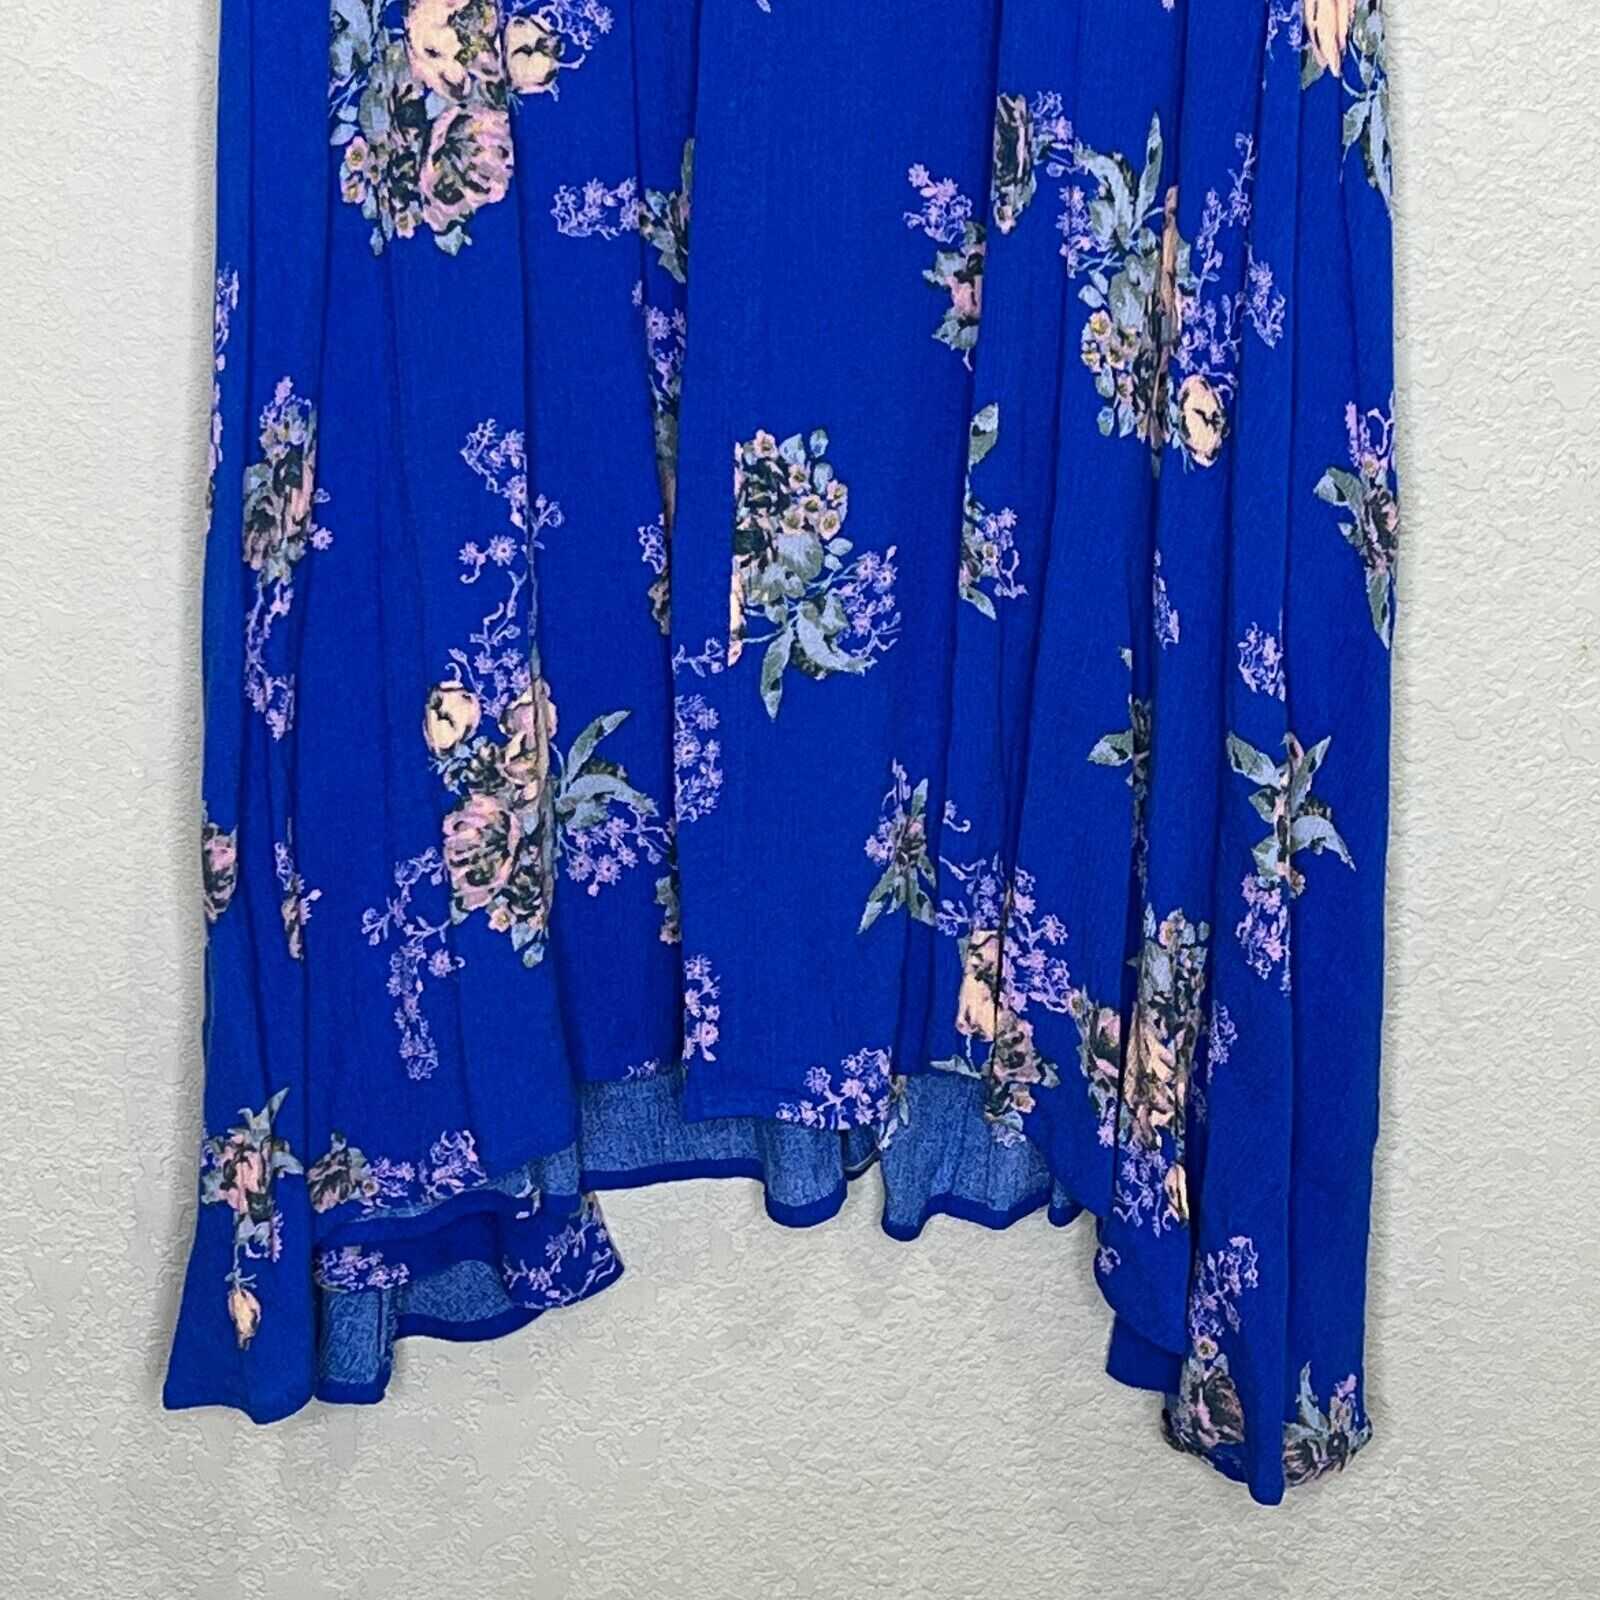 Free People Blue Floral Snap Out of It Tree Swing Tunic Dress Size Small